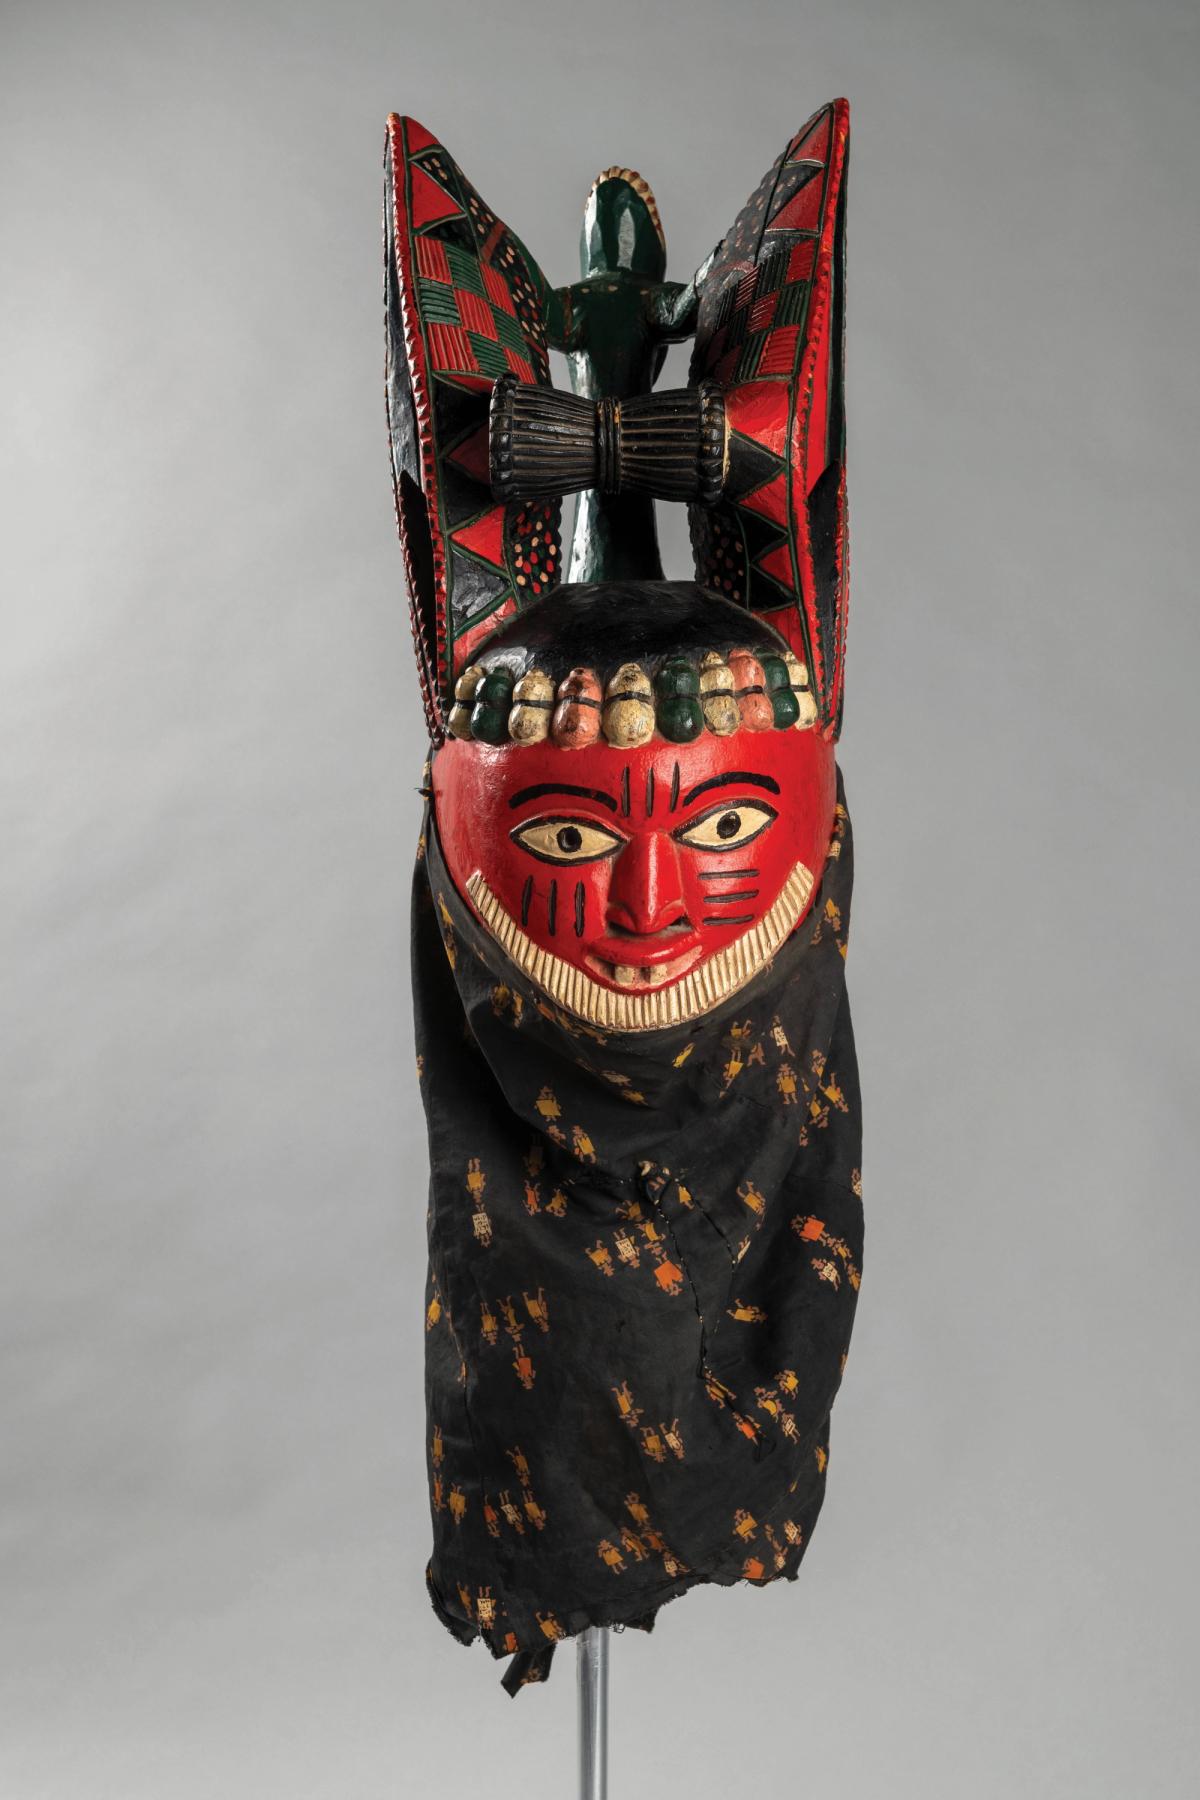 This ancestor mask (1970-87) by an unknown Yoruba artist in Nigeria is one of the works on show Photographic Unit, University of Glasgow